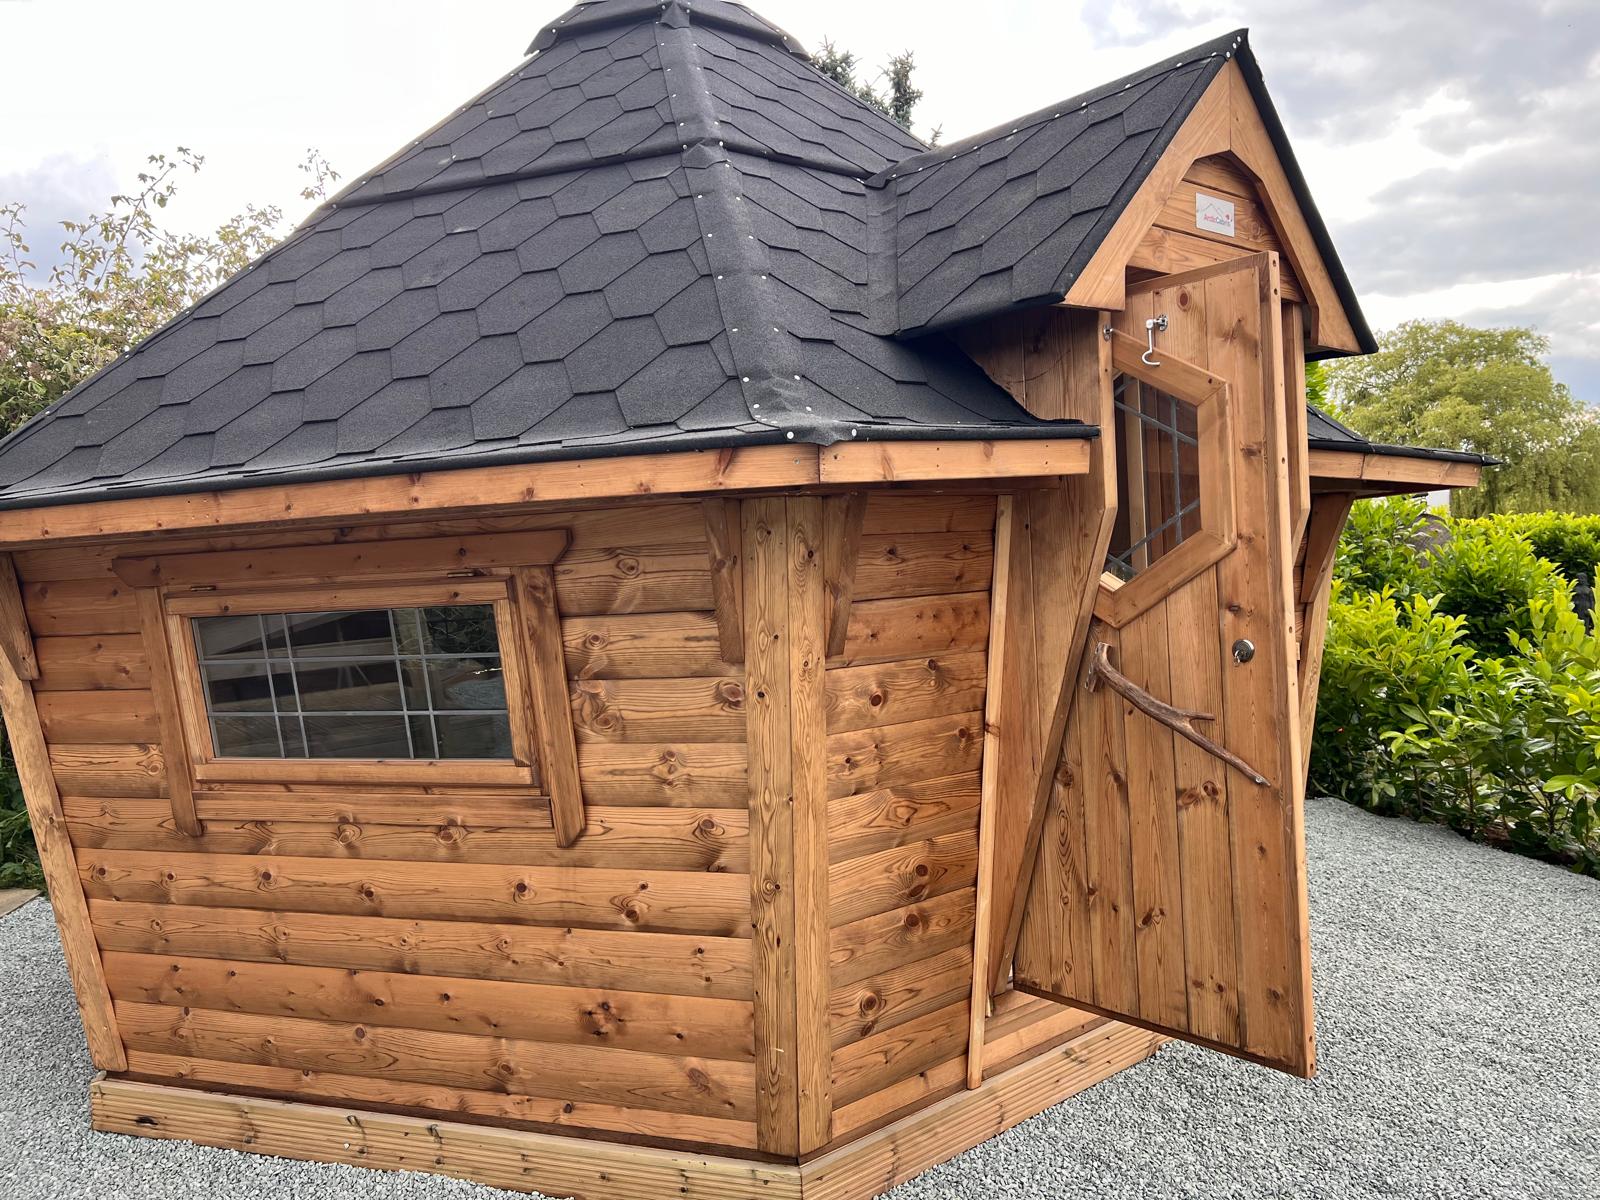 The pointed roof party hut with a grey roof and wooden boards